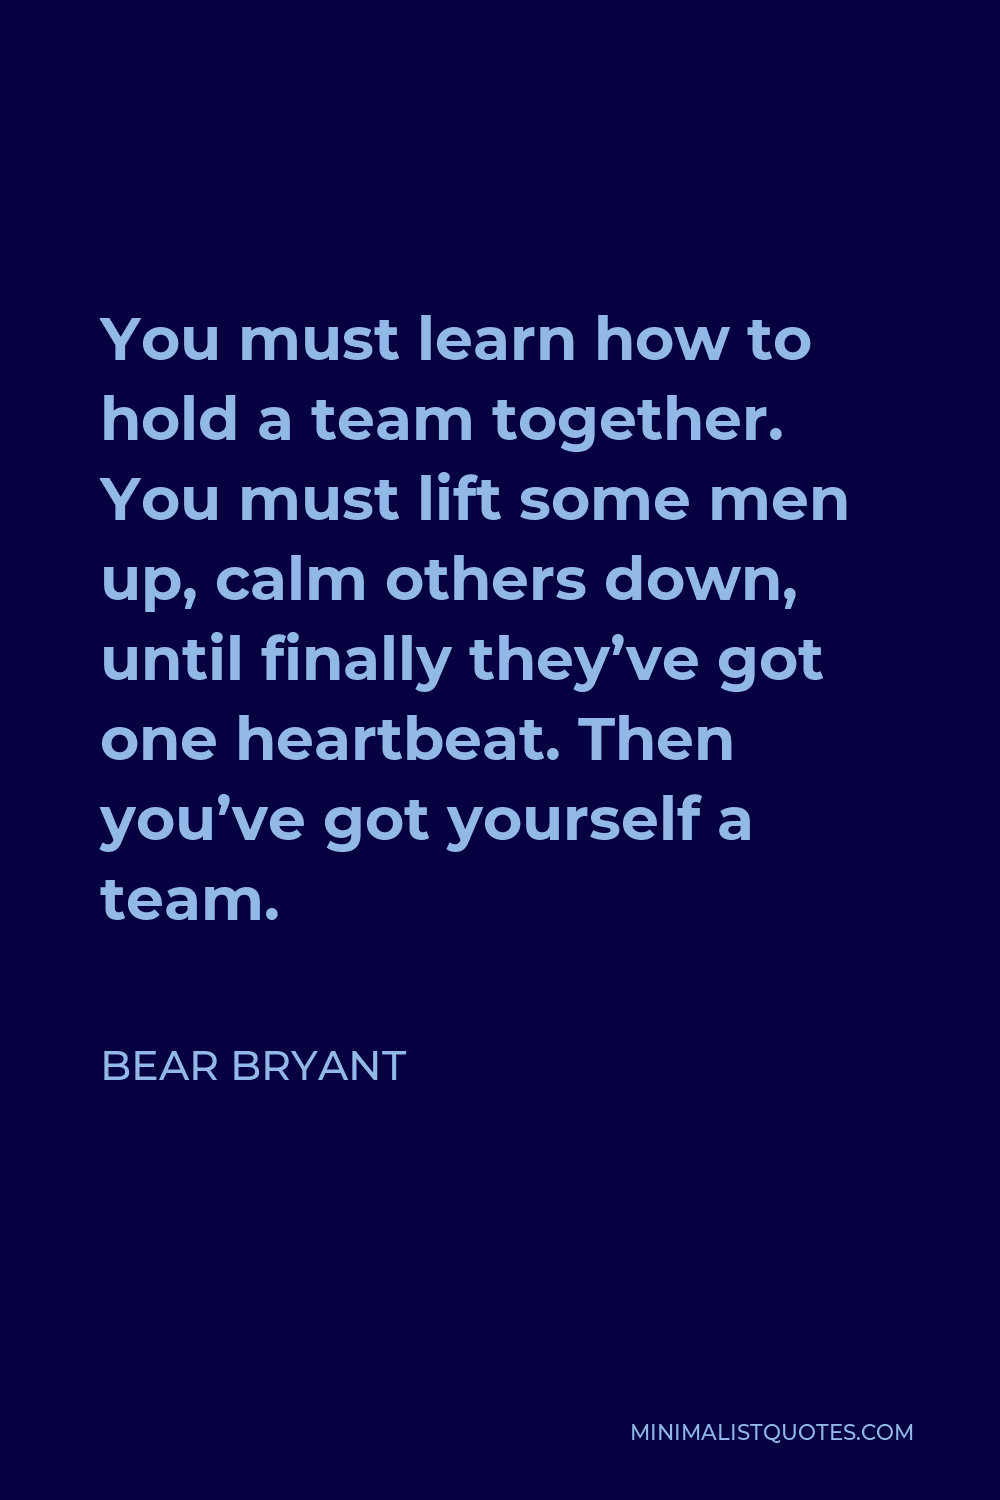 Bear Bryant Quote - You must learn how to hold a team together. You must lift some men up, calm others down, until finally they’ve got one heartbeat. Then you’ve got yourself a team.